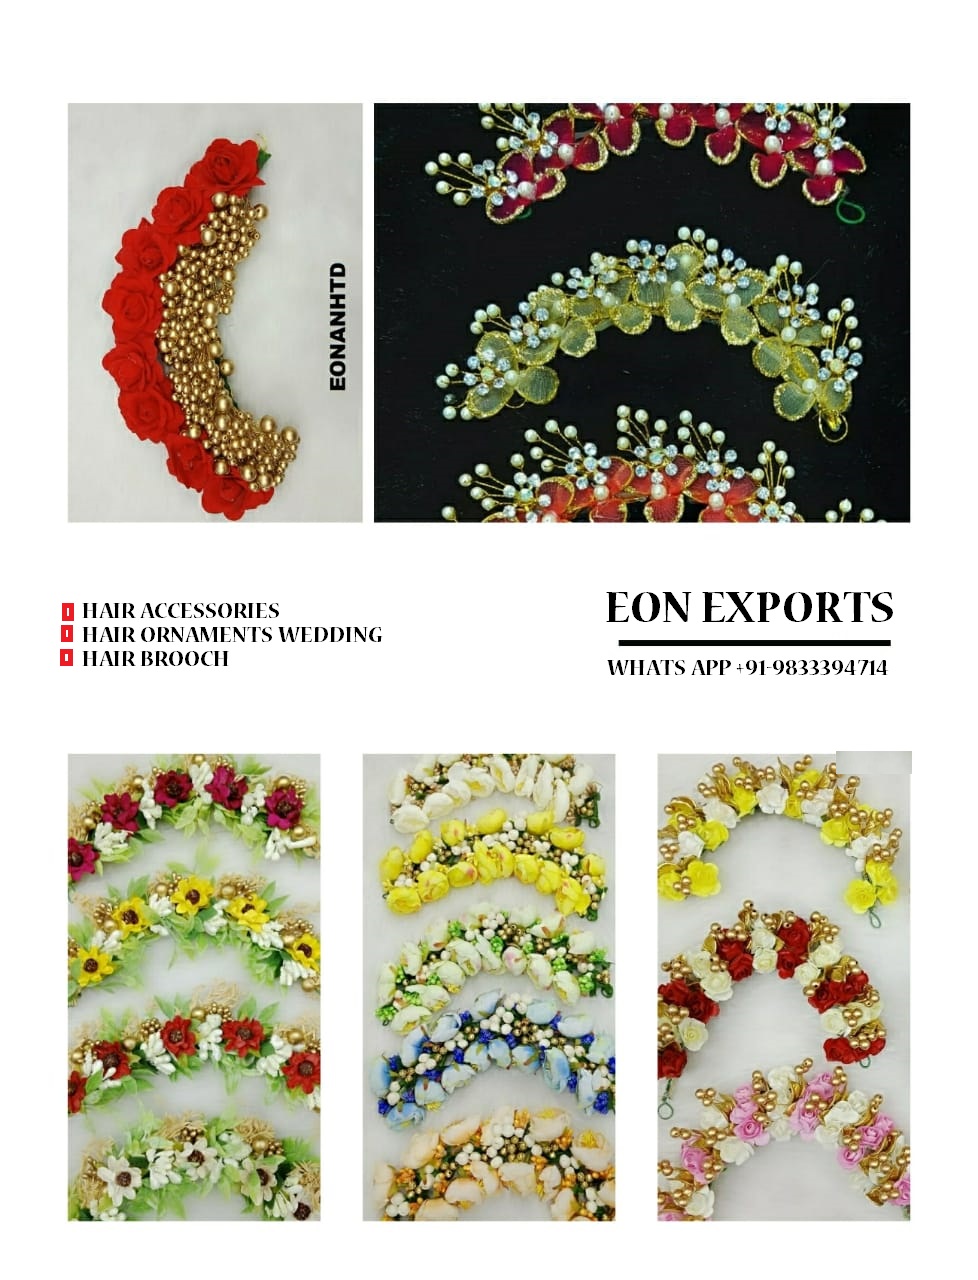 Hair Accessories - Manufacturers, Suppliers From New Delhi